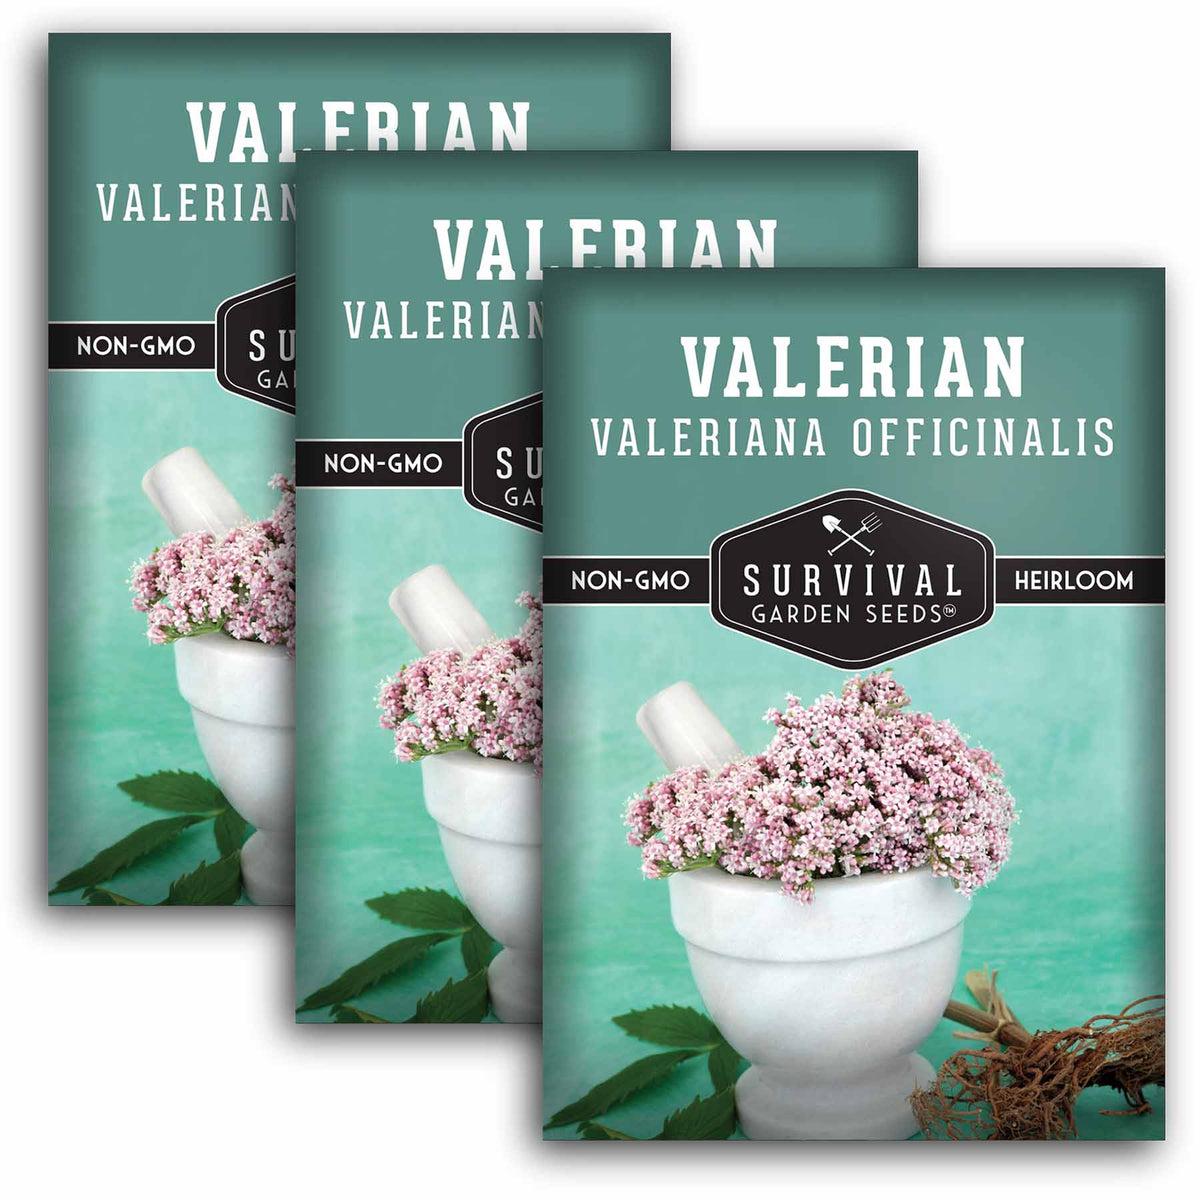 3 packets of Valerian seeds